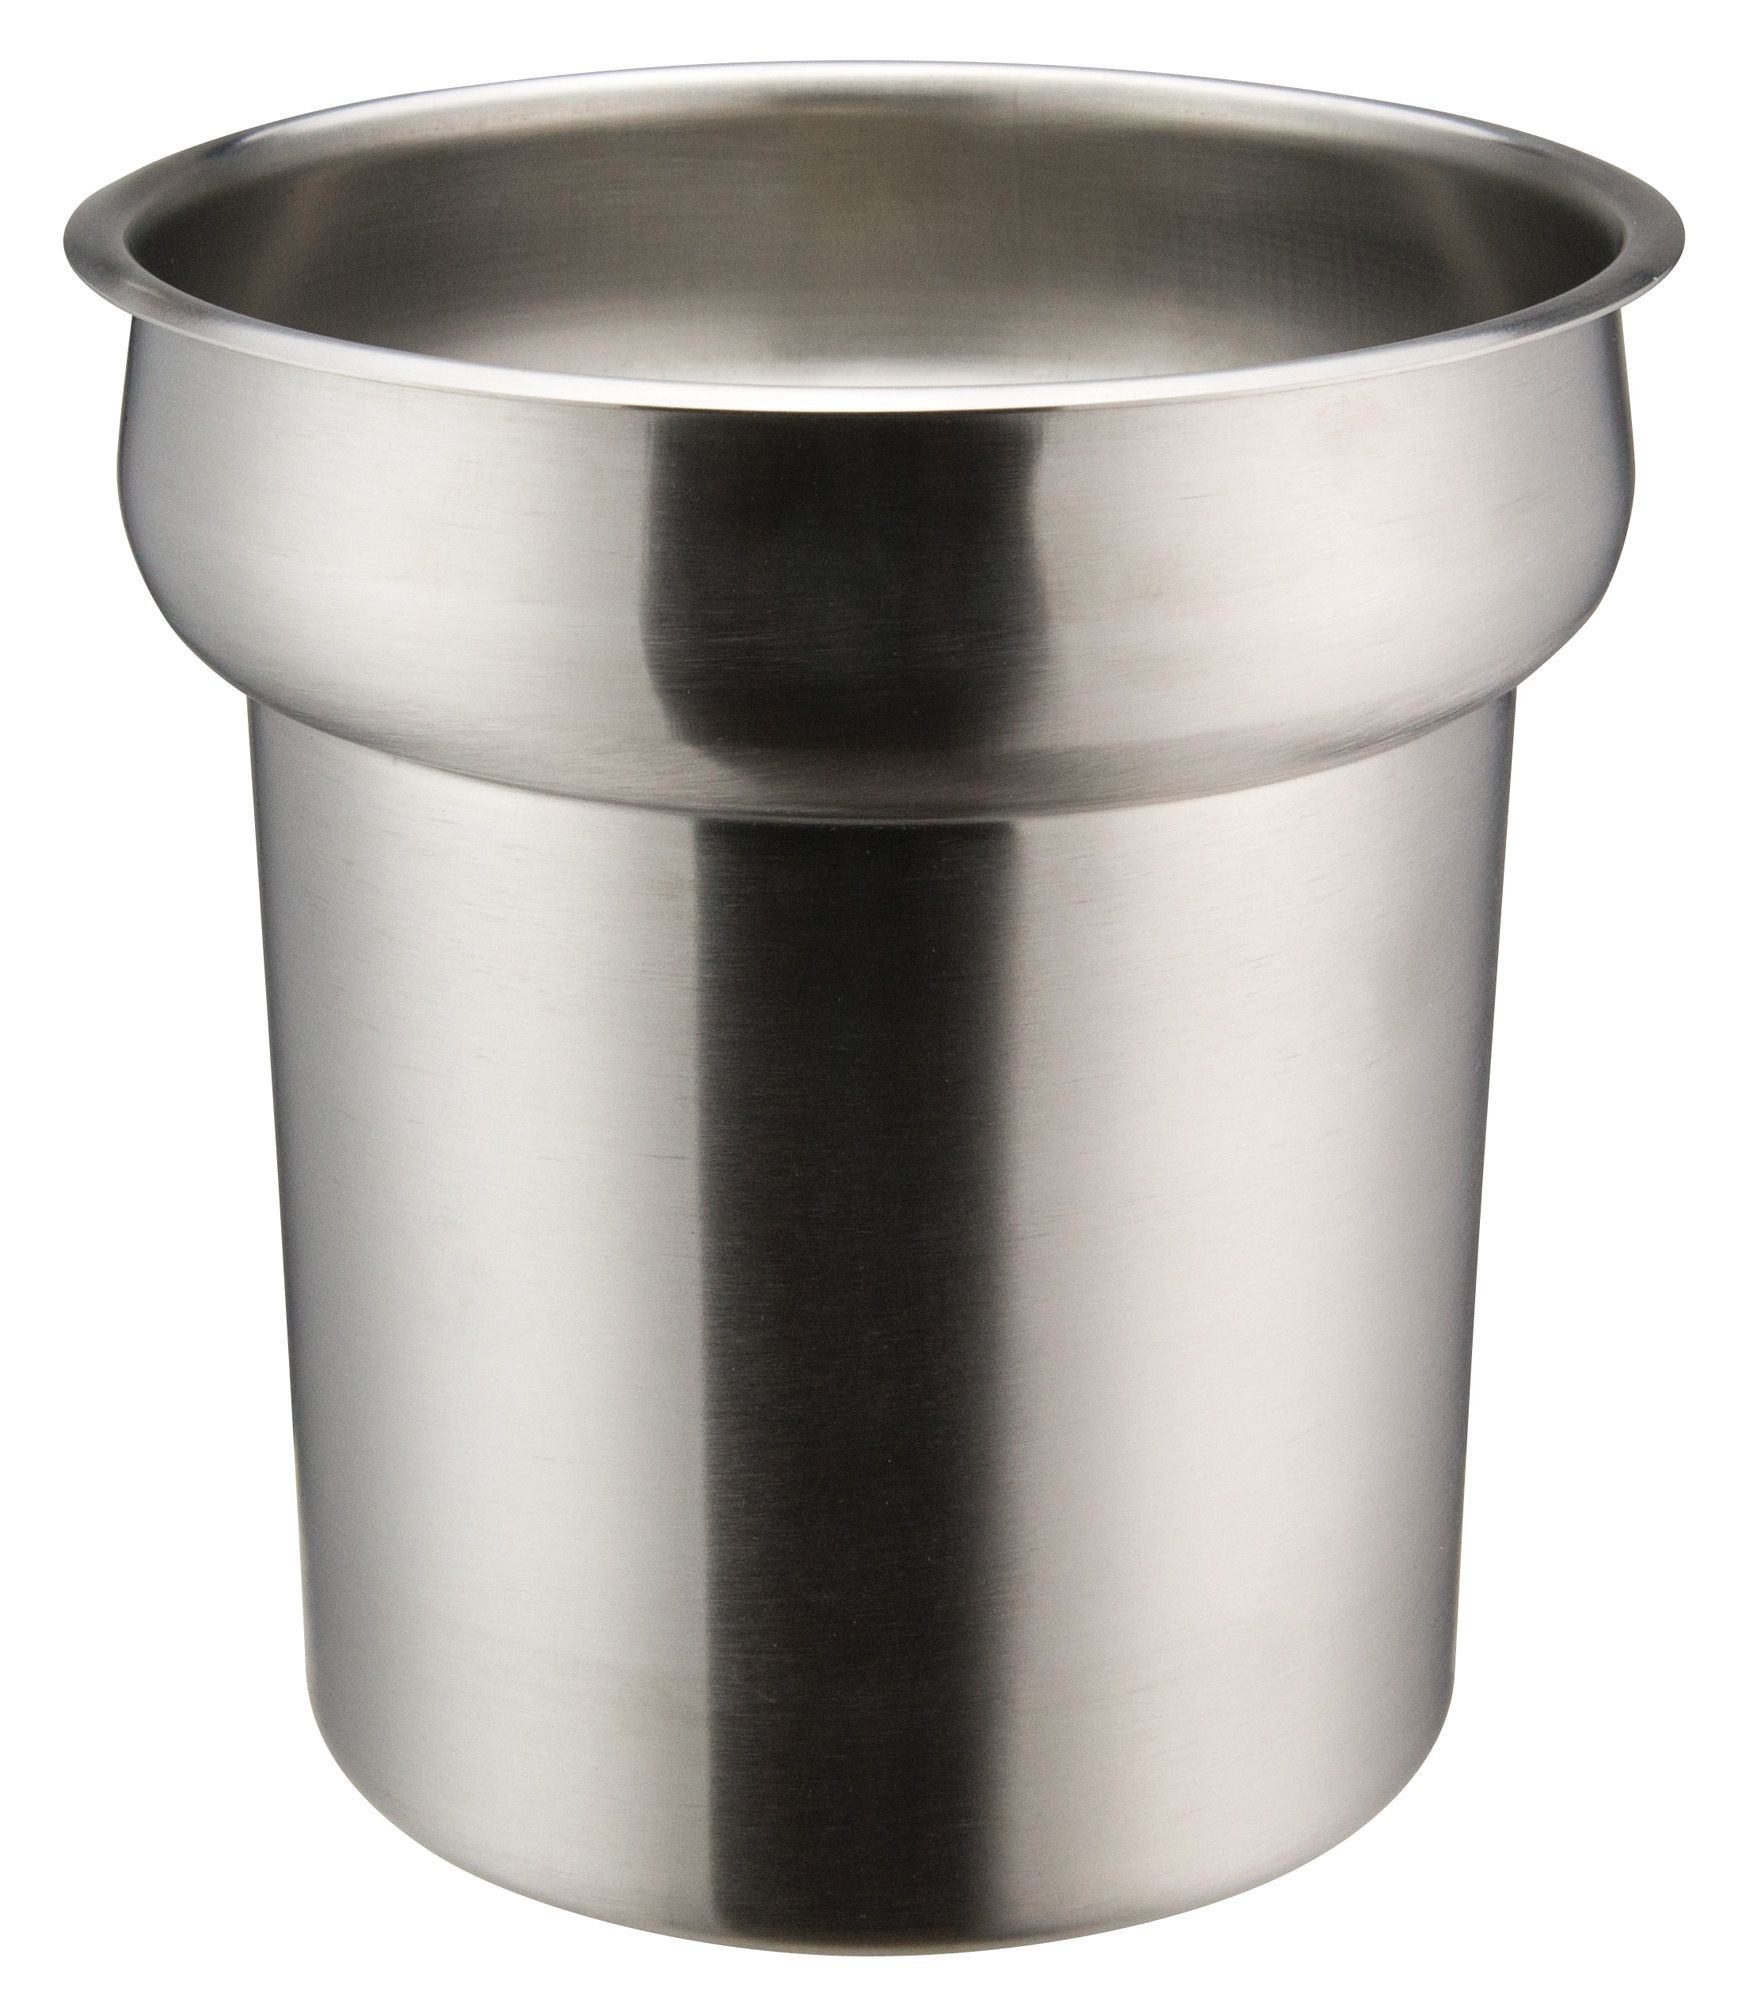 Winco INSN-4 Prime Stainless Steel 4 Qt. Inset